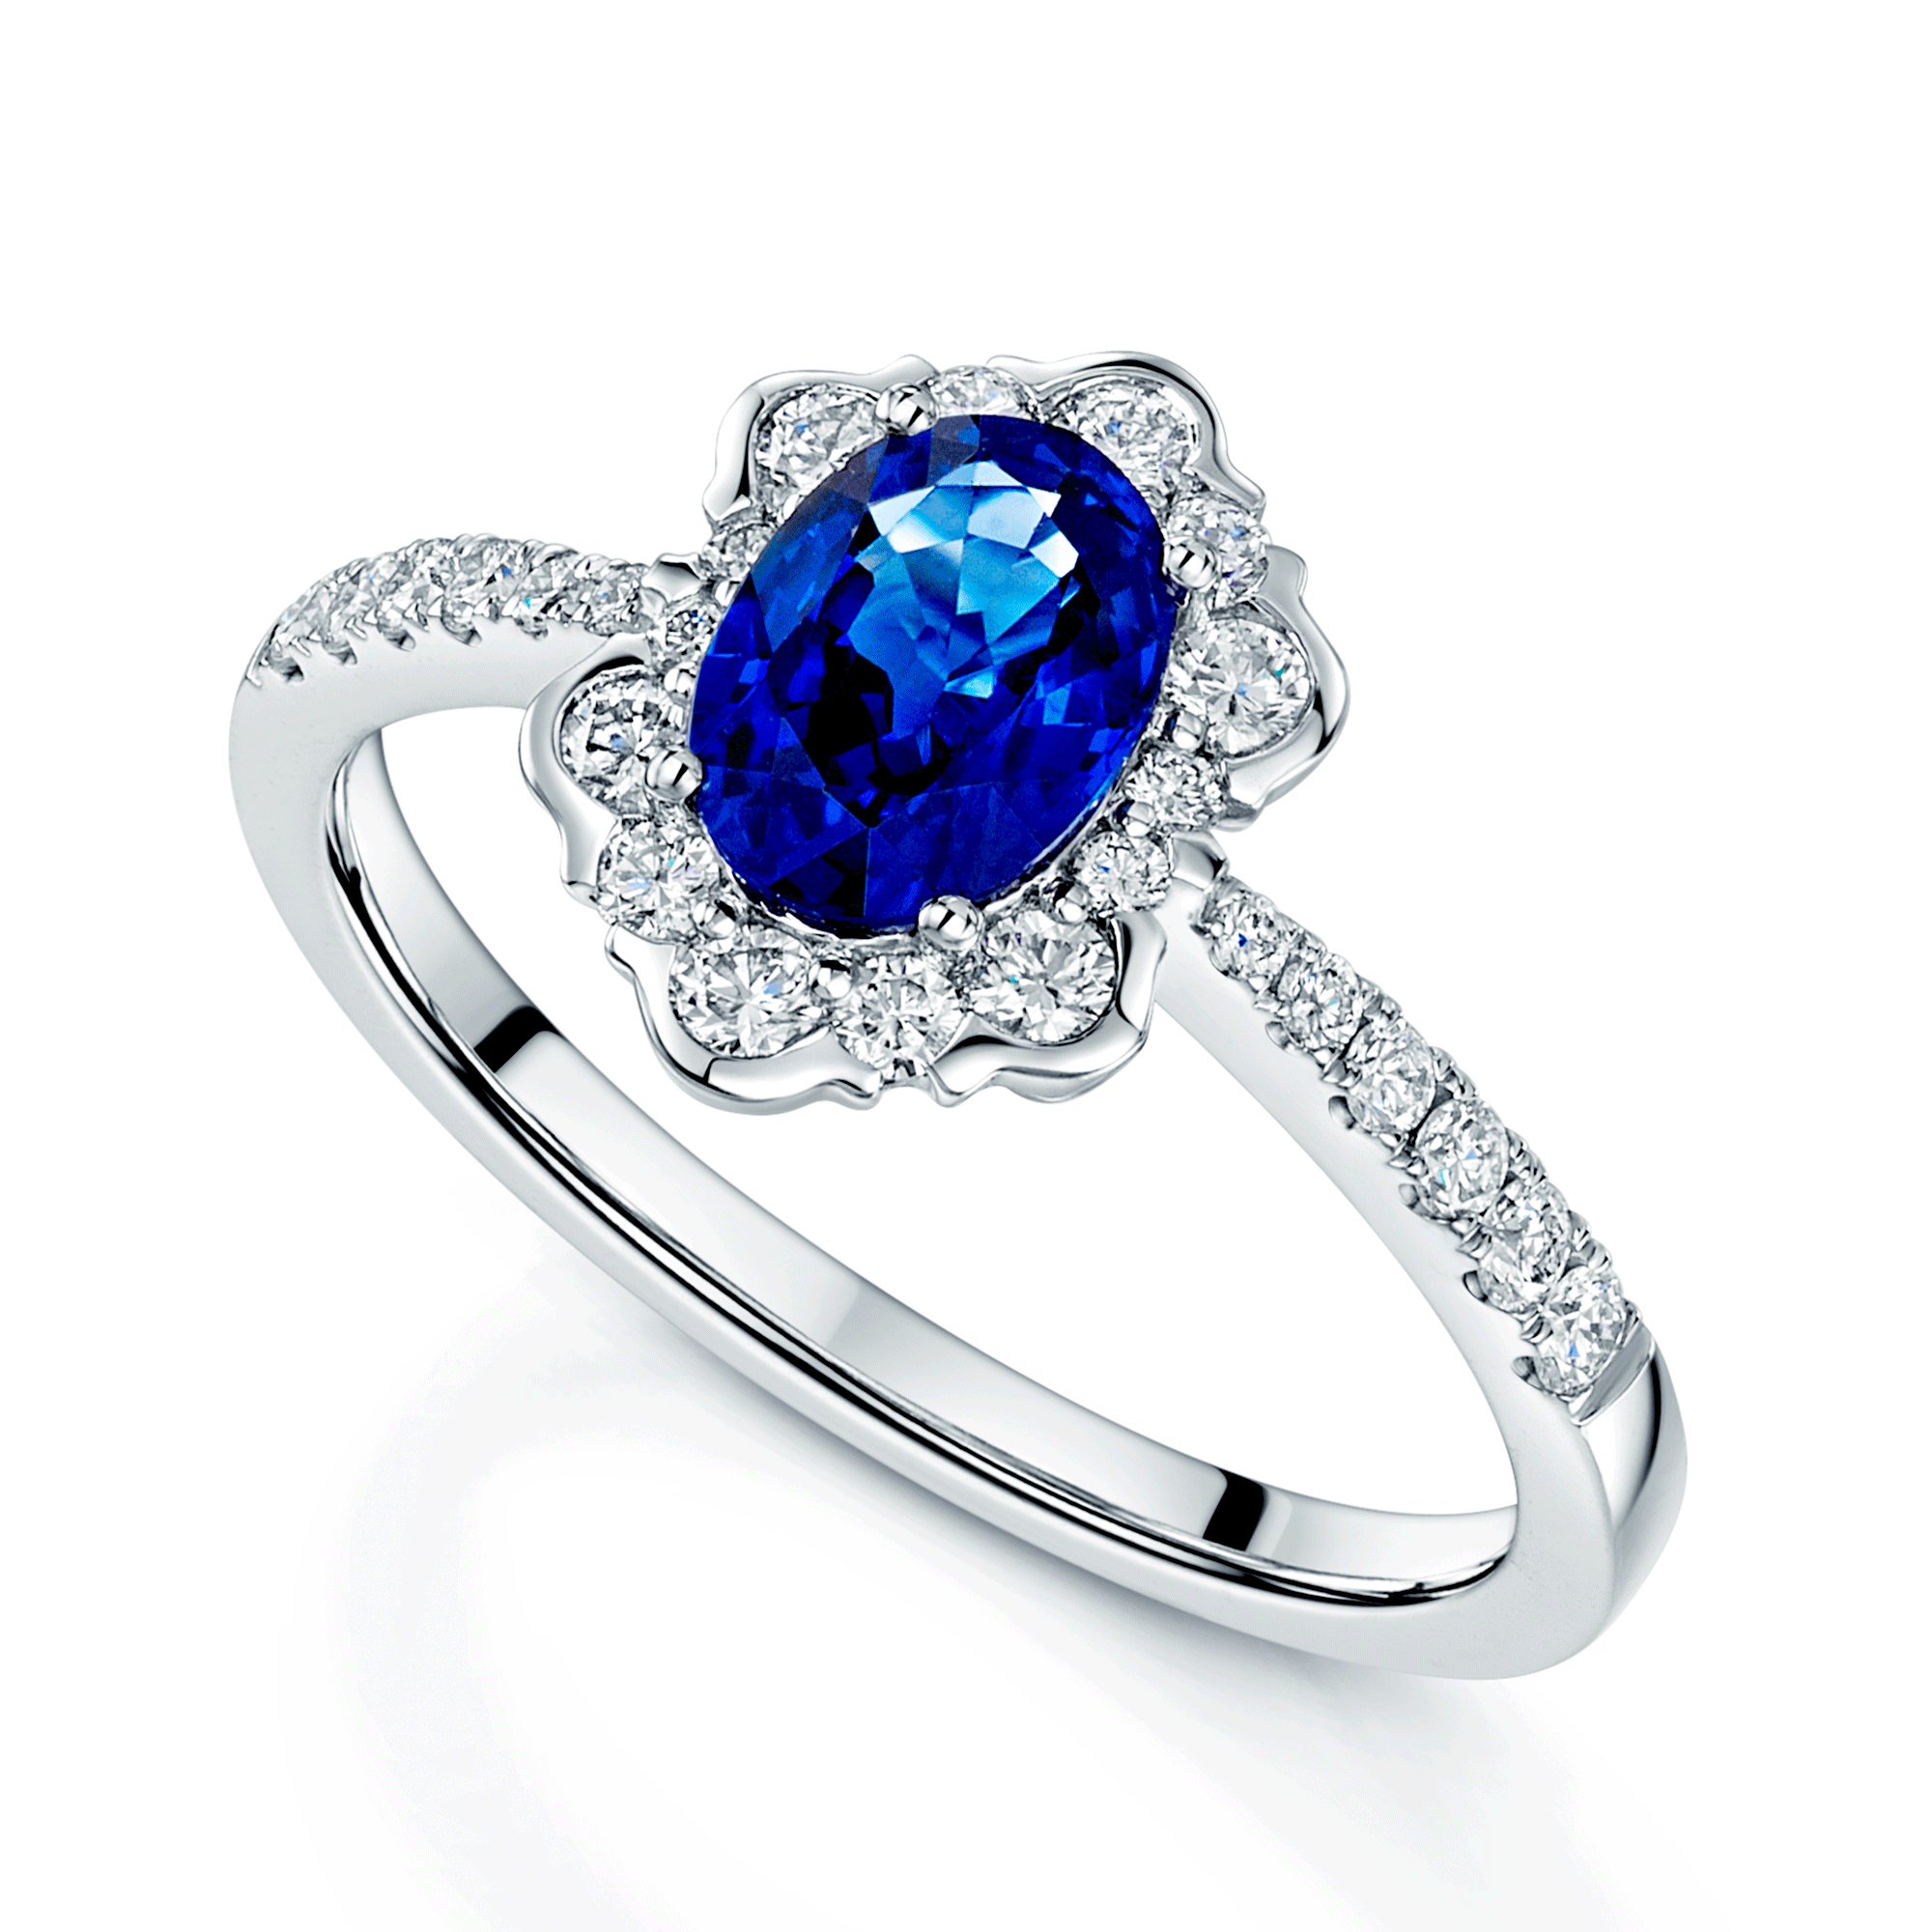 18ct White Gold Oval Sapphire And Diamond Fancy Cluster Ring With Diamond Shoulders